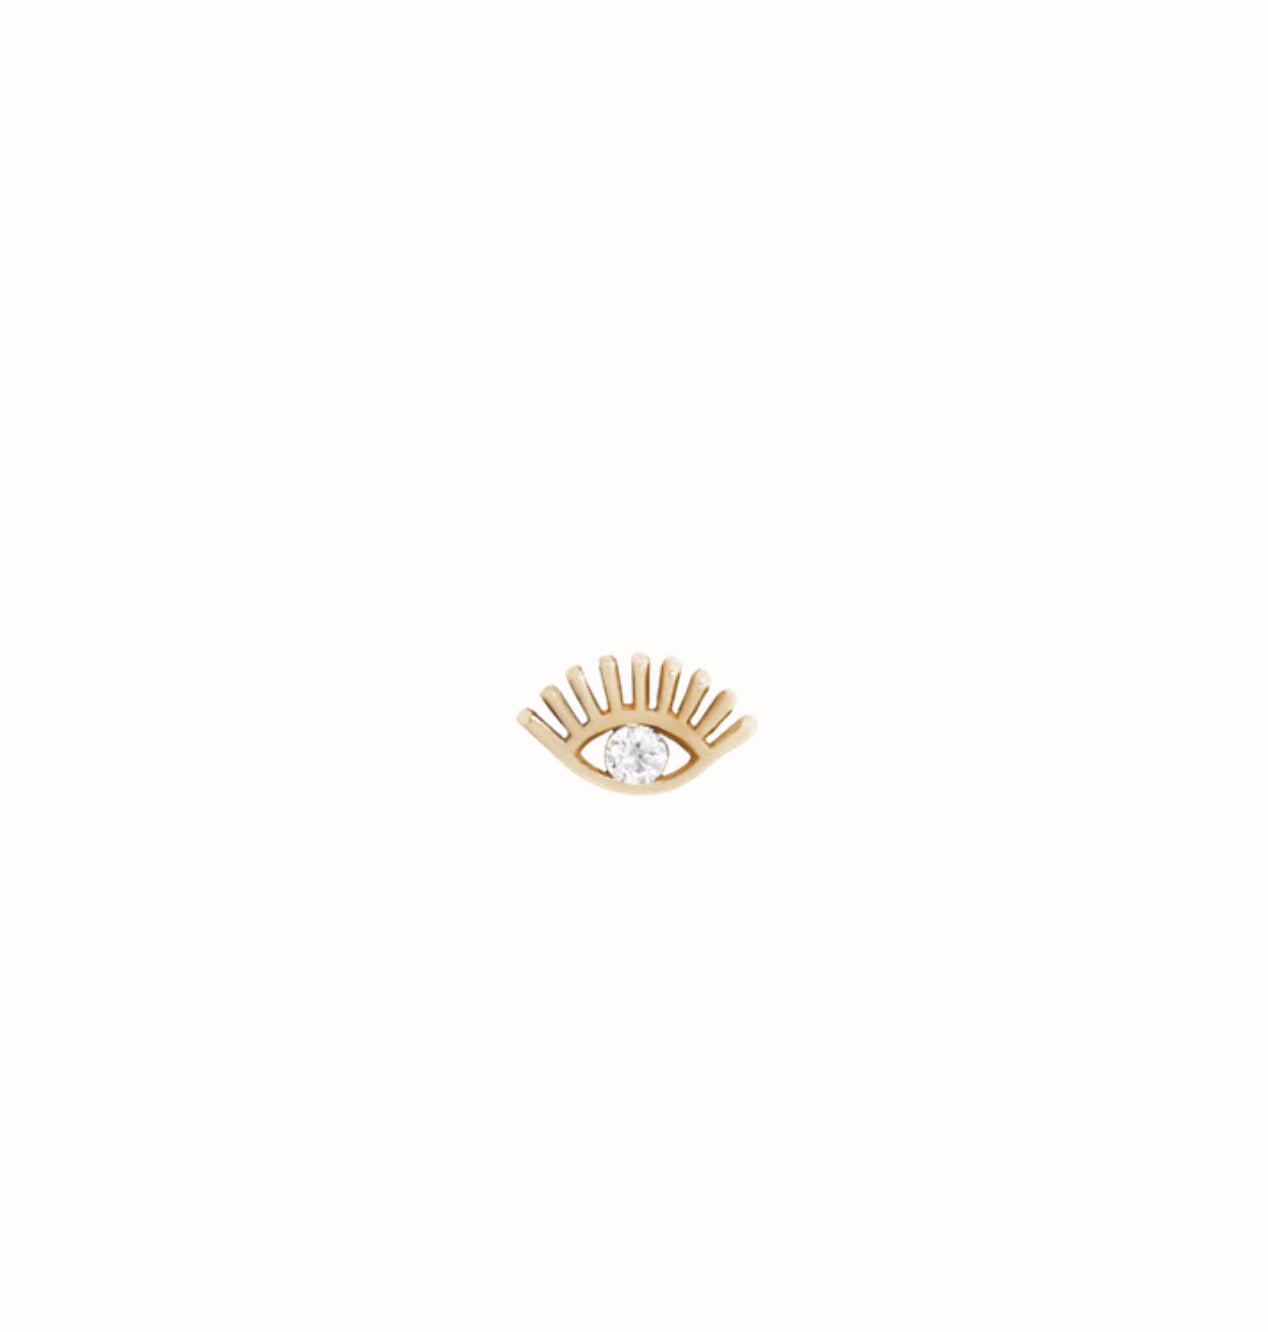 MAYA JEWELRY - PROTECTOR - DIAMOND - 14KT SOLID GOLD - THREADLESS END